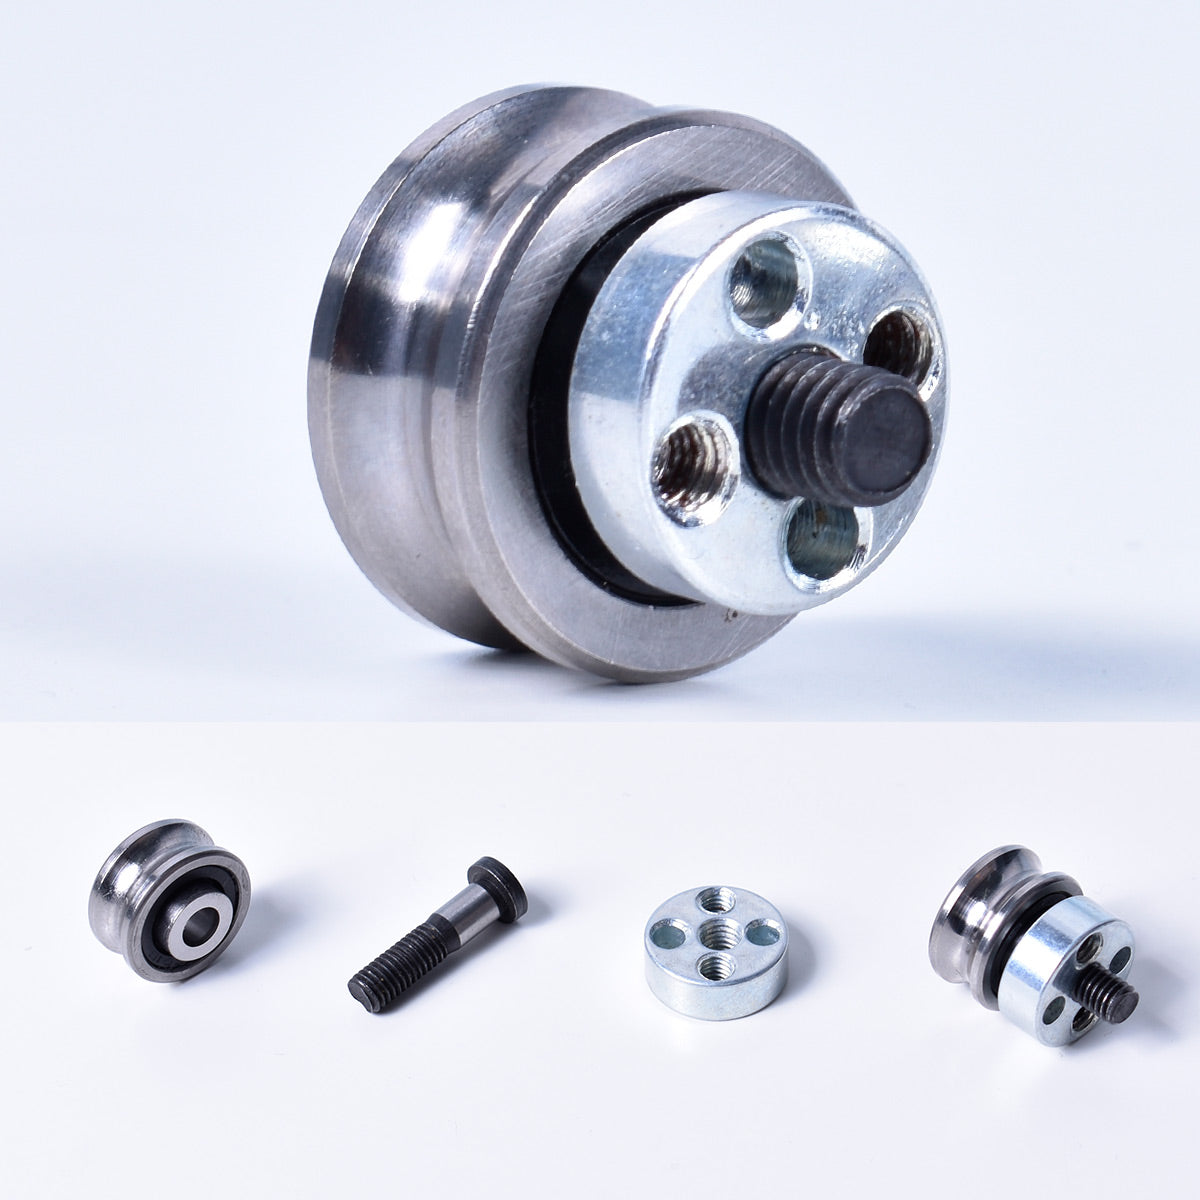 Startnow Ball Bearings SG15 SG20 Double Row Miniature Pulley Transmission Eccentric Wheel M5 M6 Screw Bolts